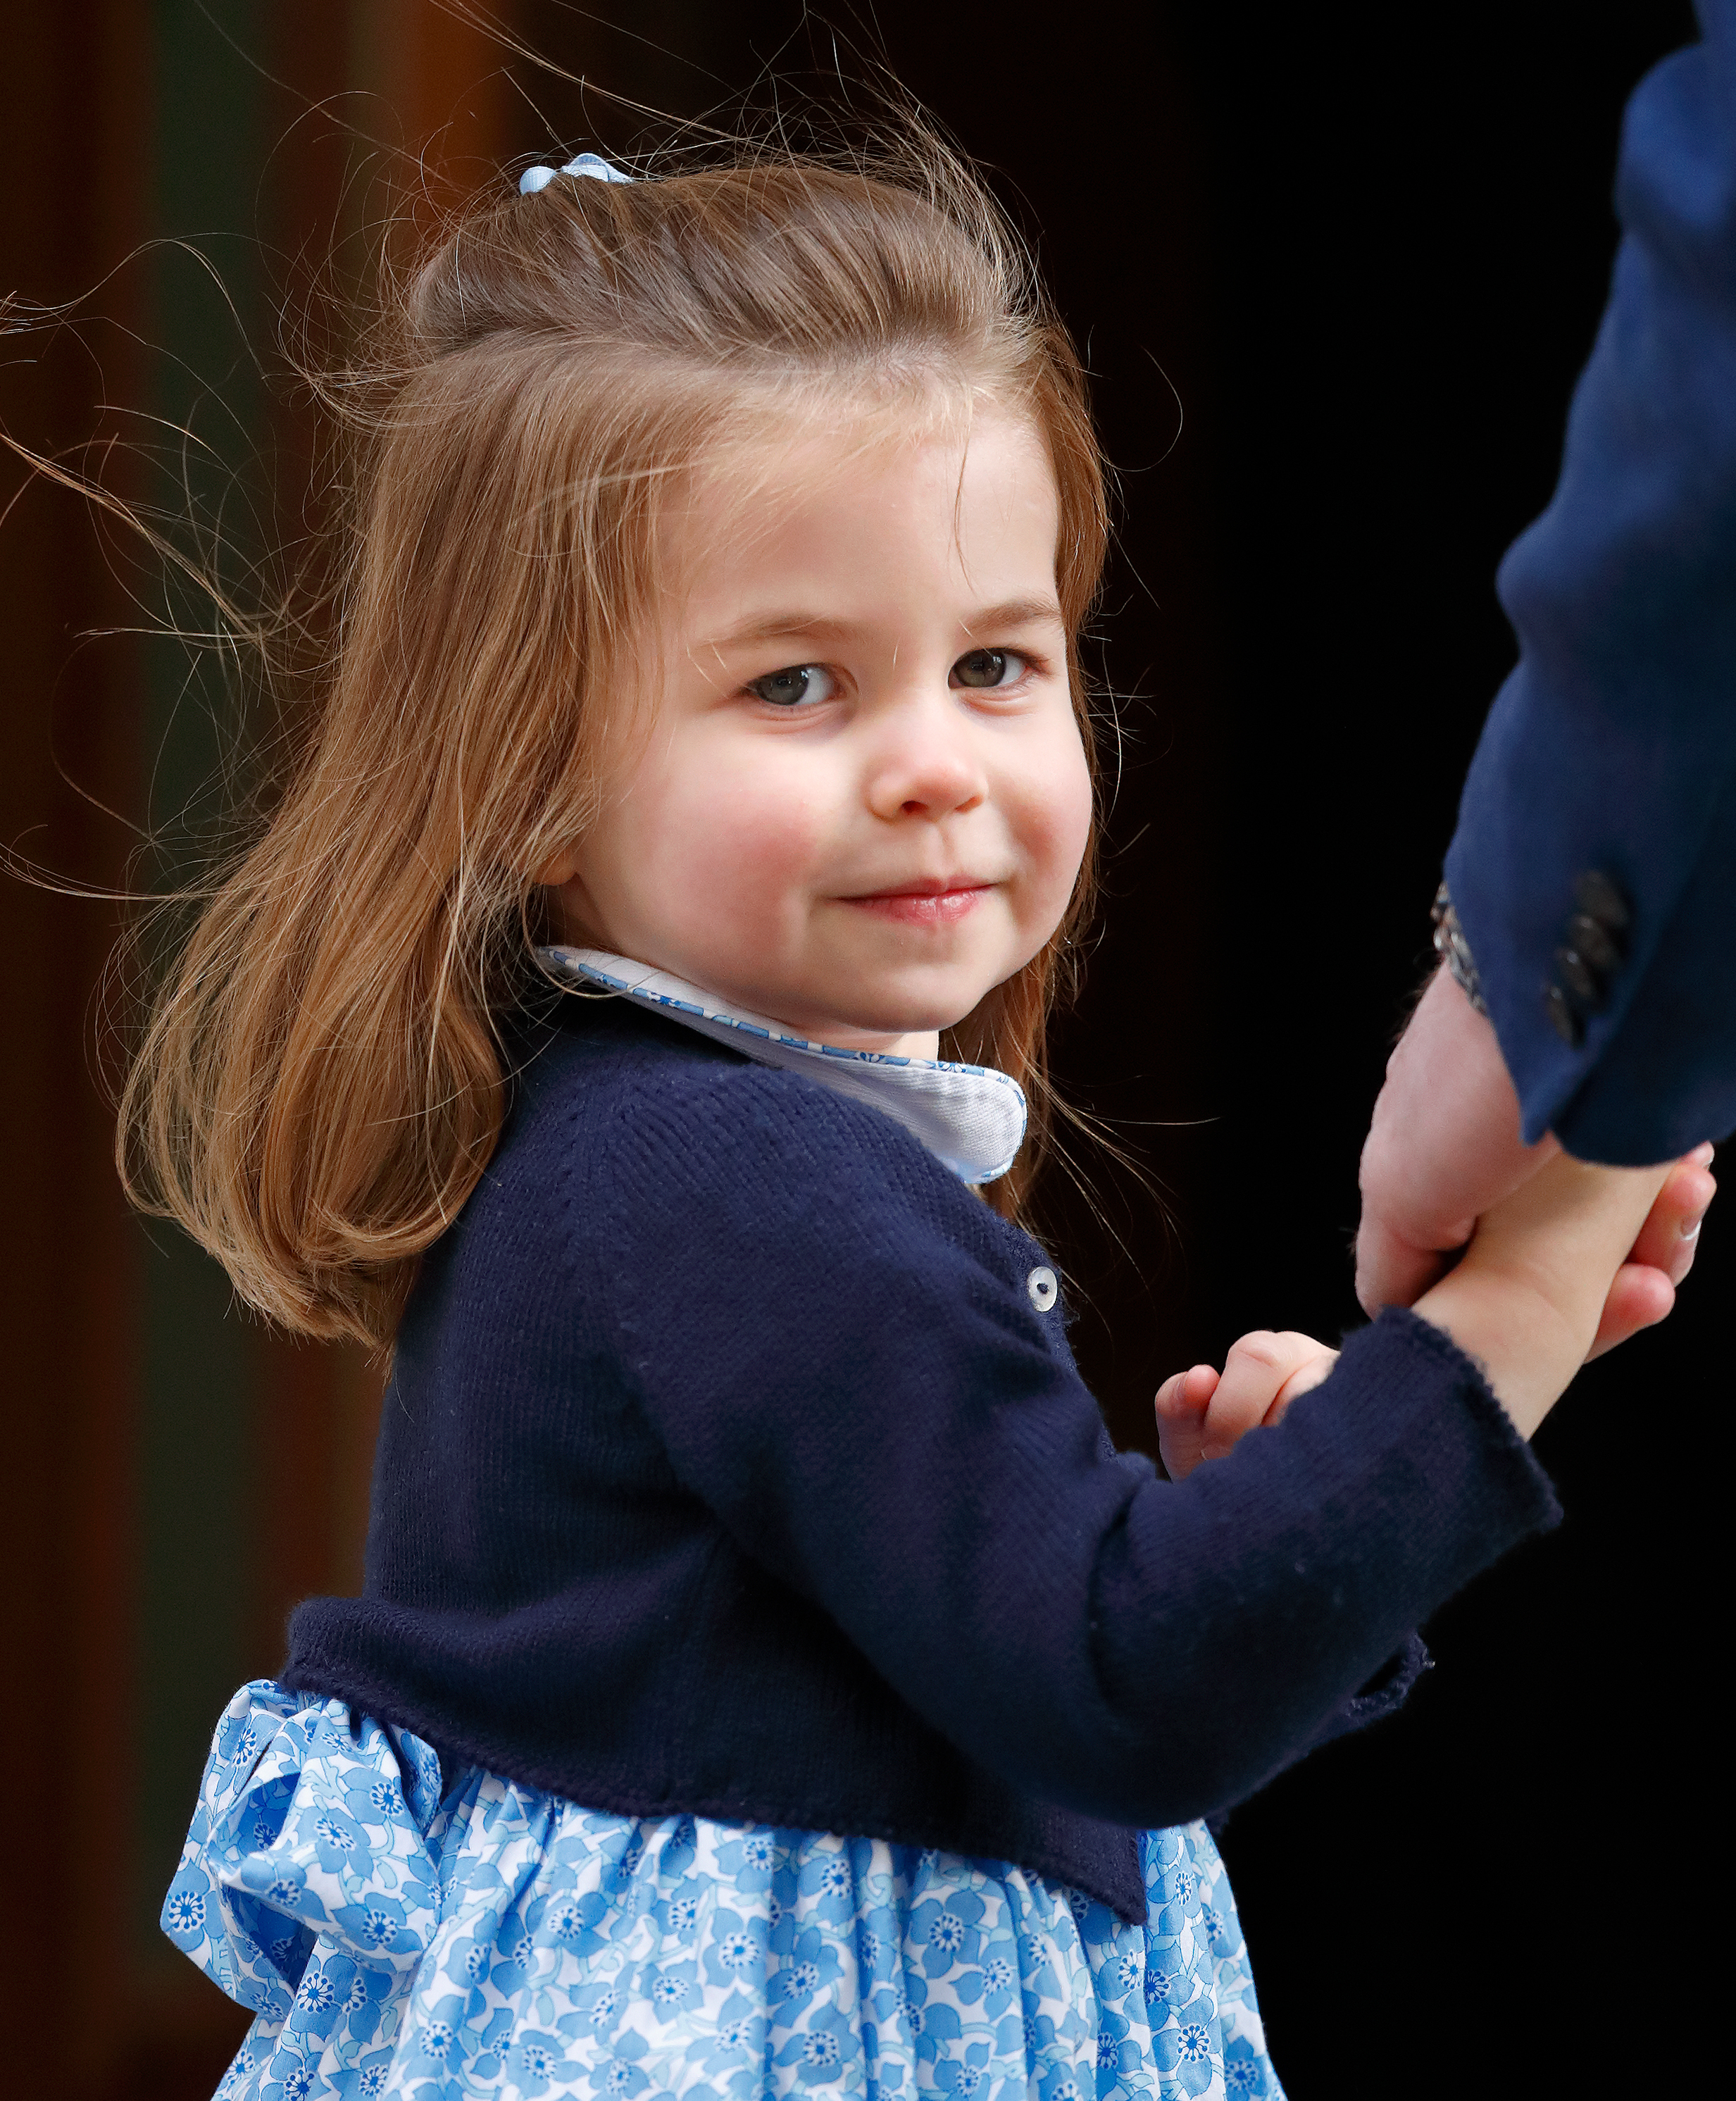 <p>Princess Charlotte flashed a smile to the assembled media as she and dad <a href="https://www.wonderwall.com/celebrity/profiles/overview/prince-william-482.article">Prince William</a> arrived at St. Mary's Hospital in London to visit <a href="https://www.wonderwall.com/celebrity/photos/prince-william-and-duchess-kate-debut-their-third-child-see-photos-young-family-3013892.gallery">newborn baby brother</a> Prince Louis on April 23, 2018.</p>